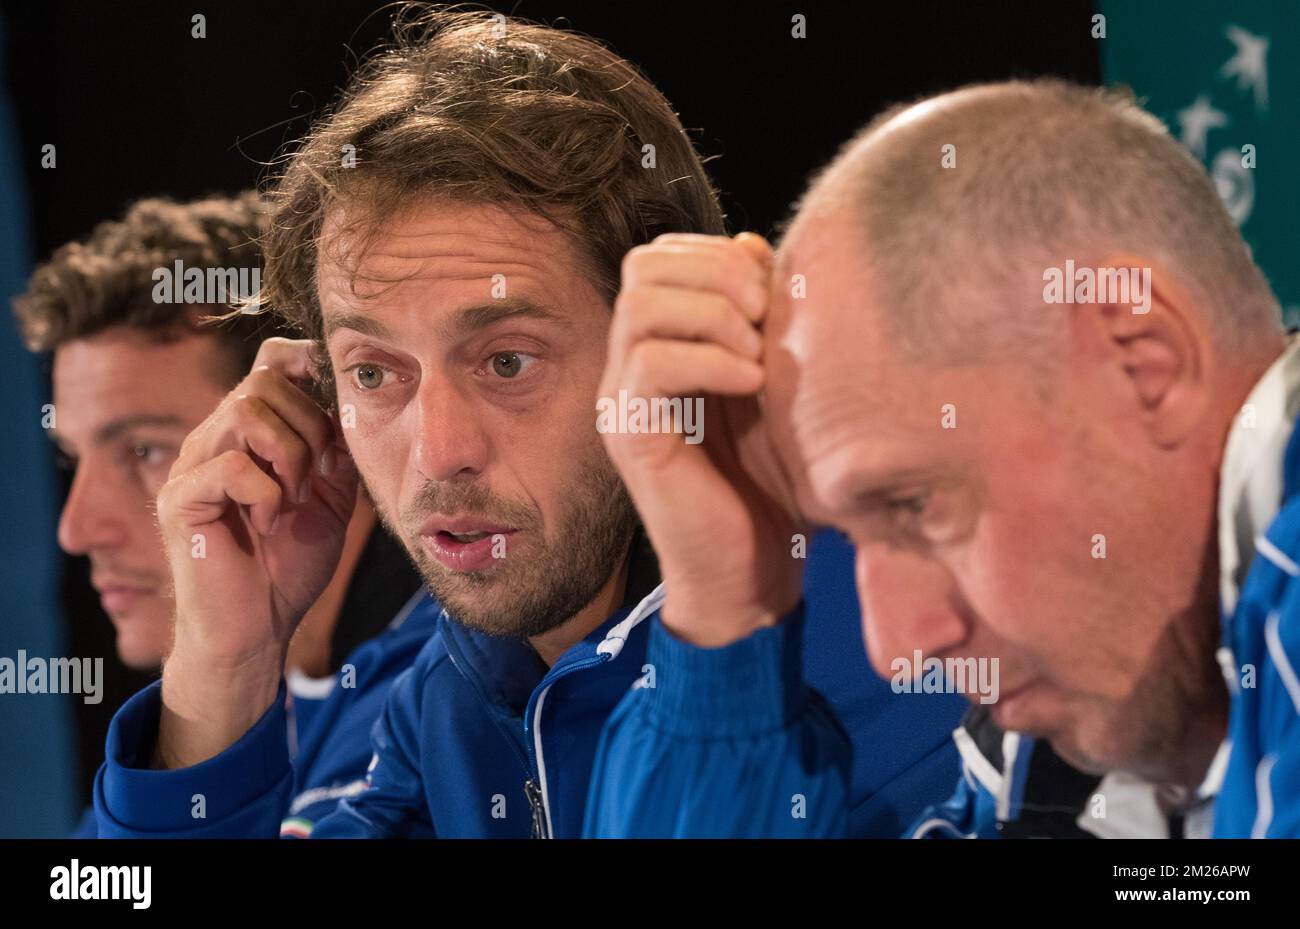 Italian Alessandro Giannessi, Italian Paolo Lorenzi and Italian captain Corrado Barazzutti pictured during a press conference of Italian team ahead of the Davis Cup World Group quarterfinal between Belgium and Italy, Tuesday 04 April 2017, in Charleroi. This Davis Cup game will be played from 07 to 09 April 2017 in Charleroi. BELGA PHOTO BENOIT DOPPAGNE Stock Photo